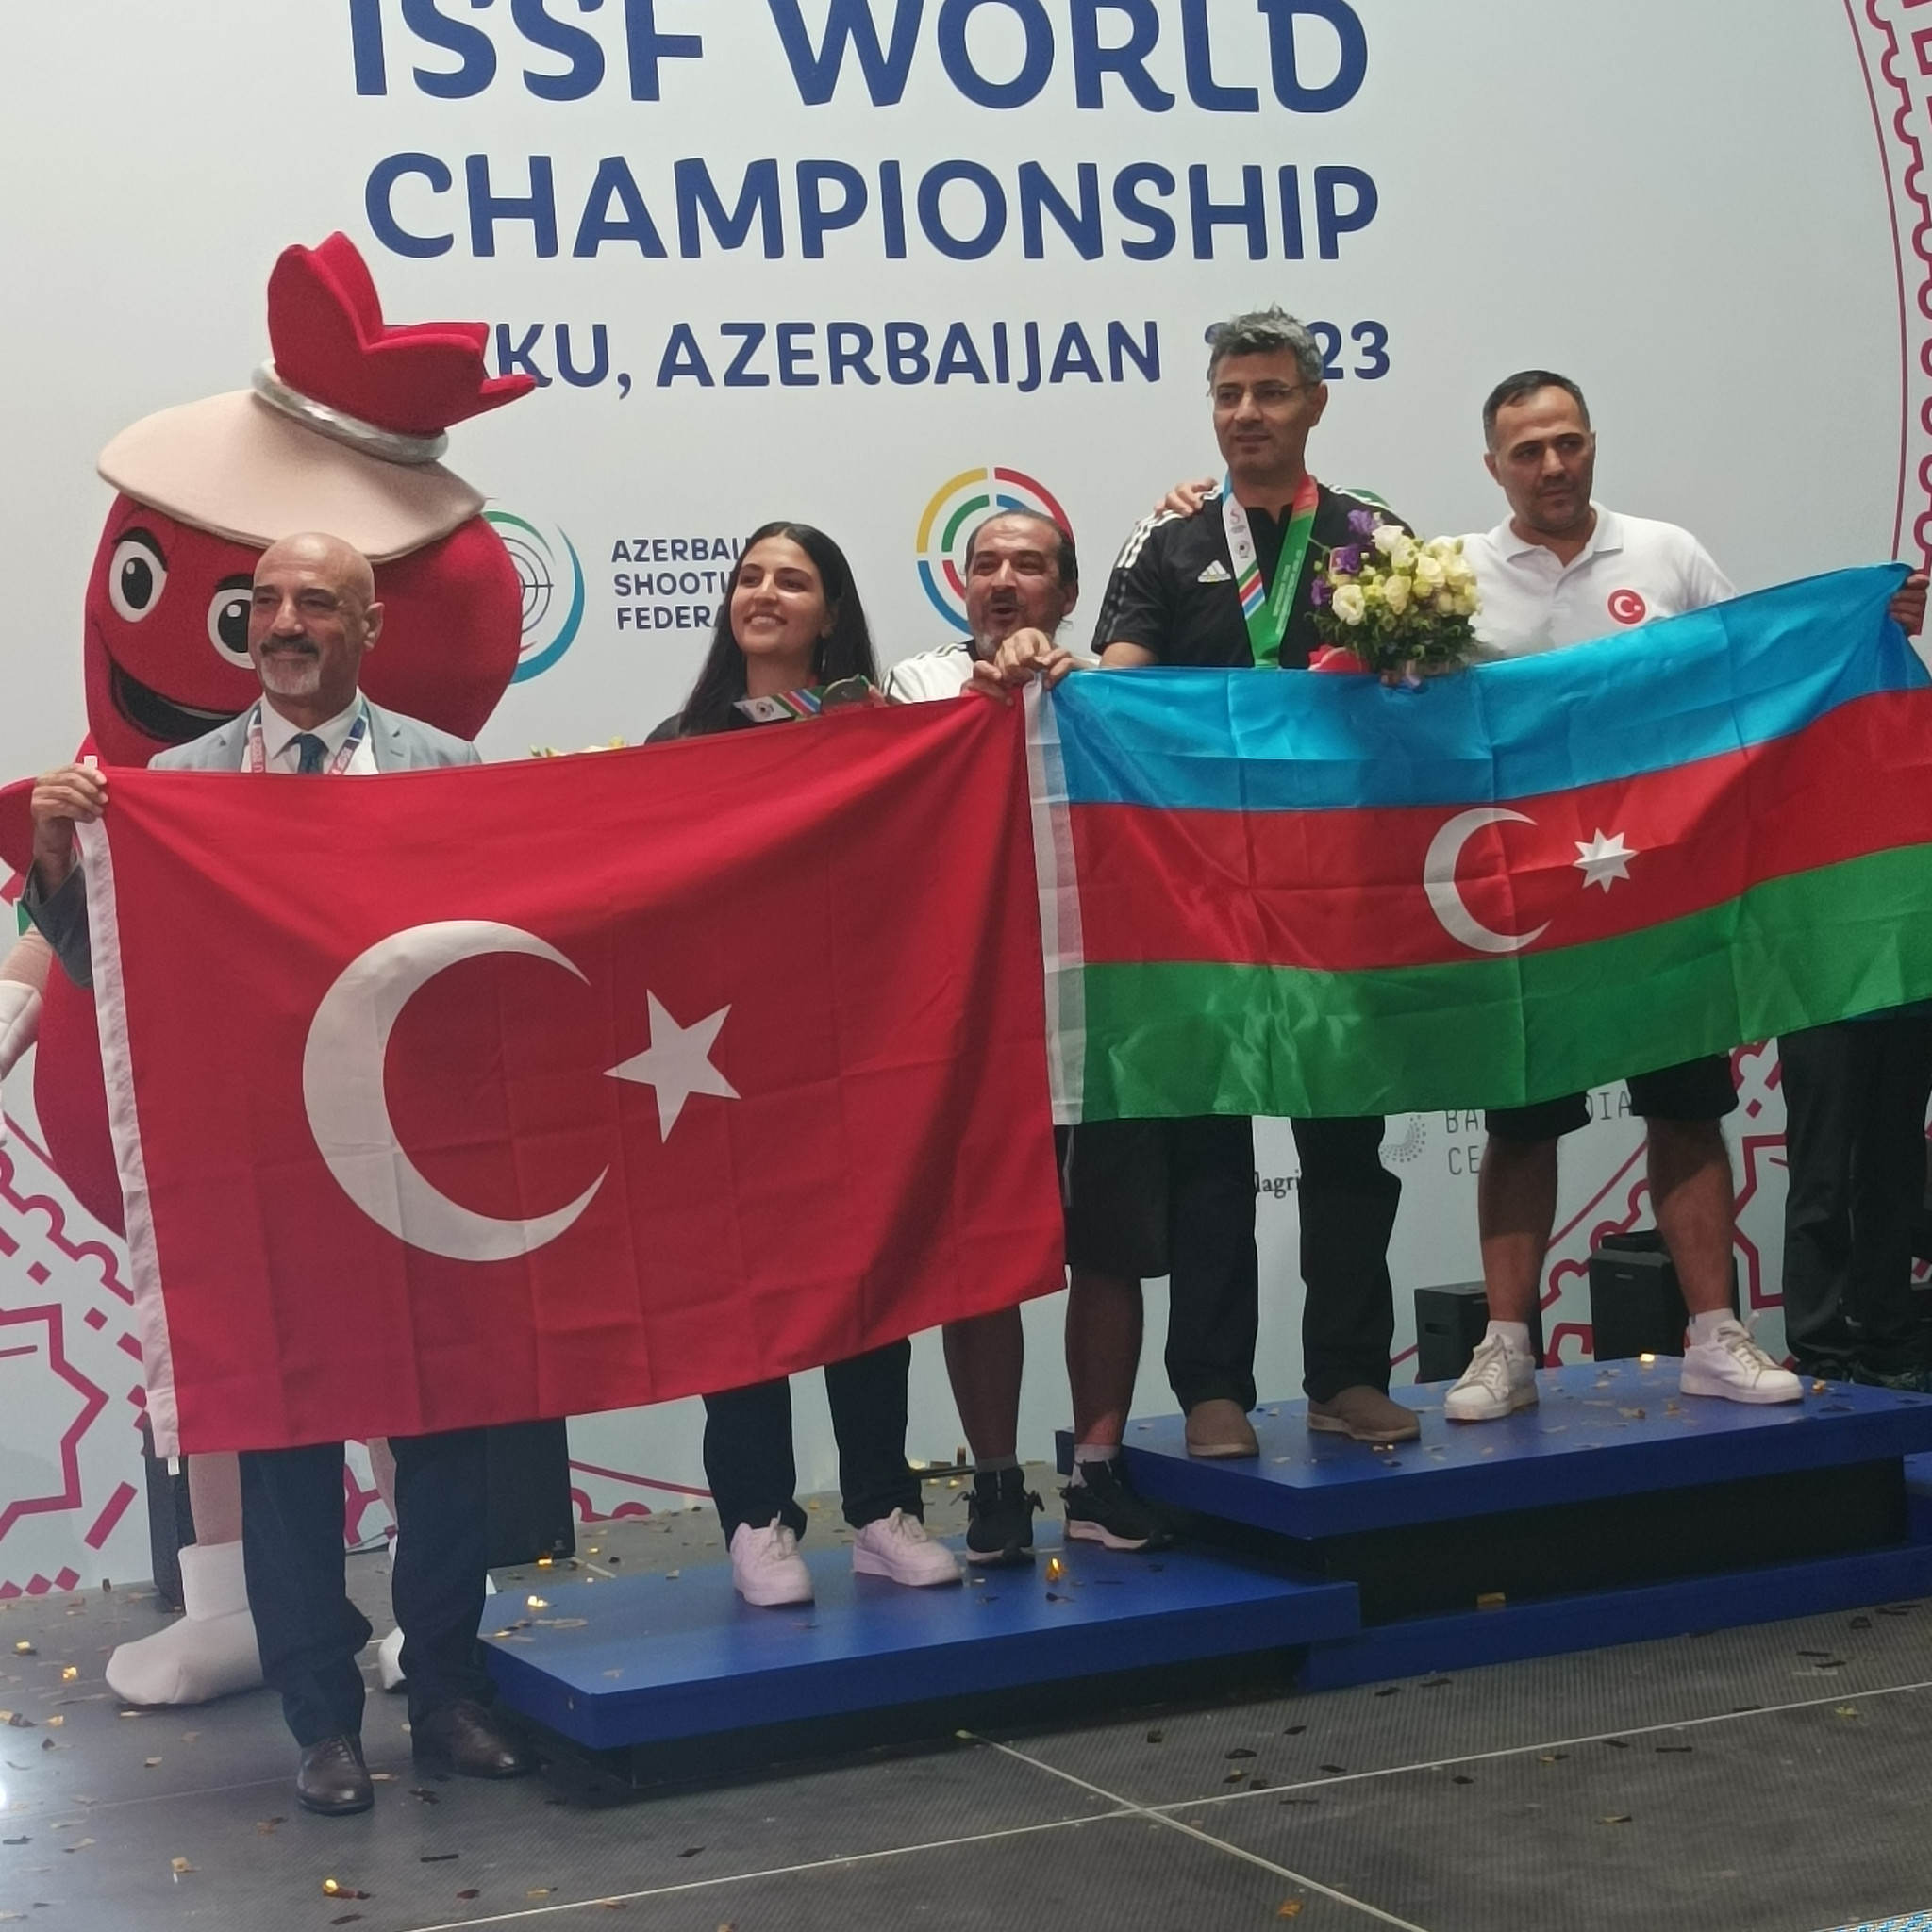 Neighbours from Turkey and Azerbaijan get together on the podium ©ITG